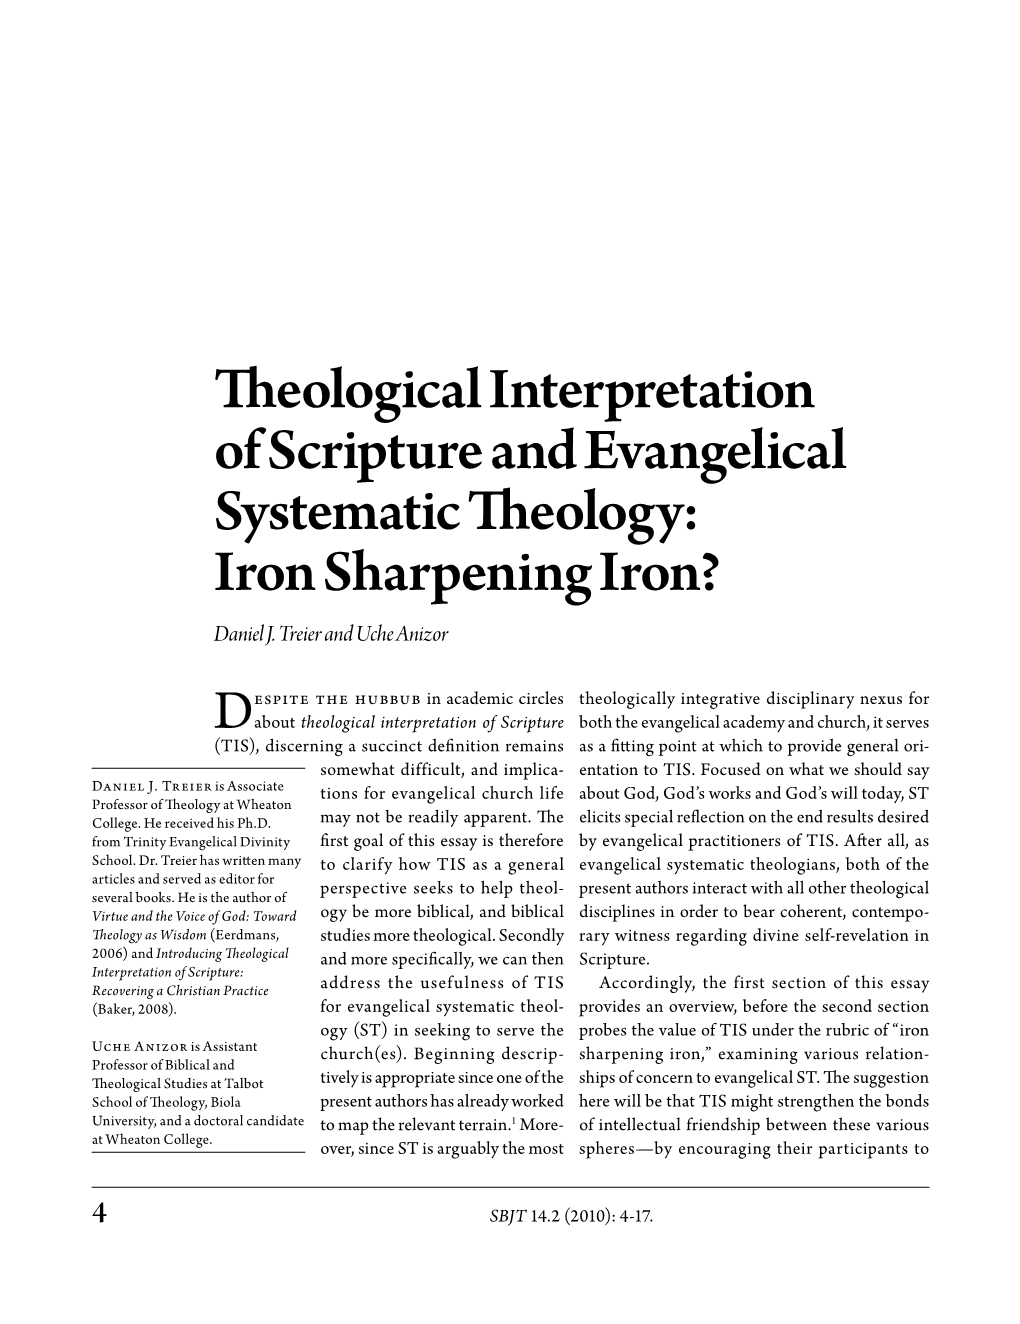 Theological Interpretation of Scripture and Evangelical Systematic Theology: Iron Sharpening Iron? Daniel J